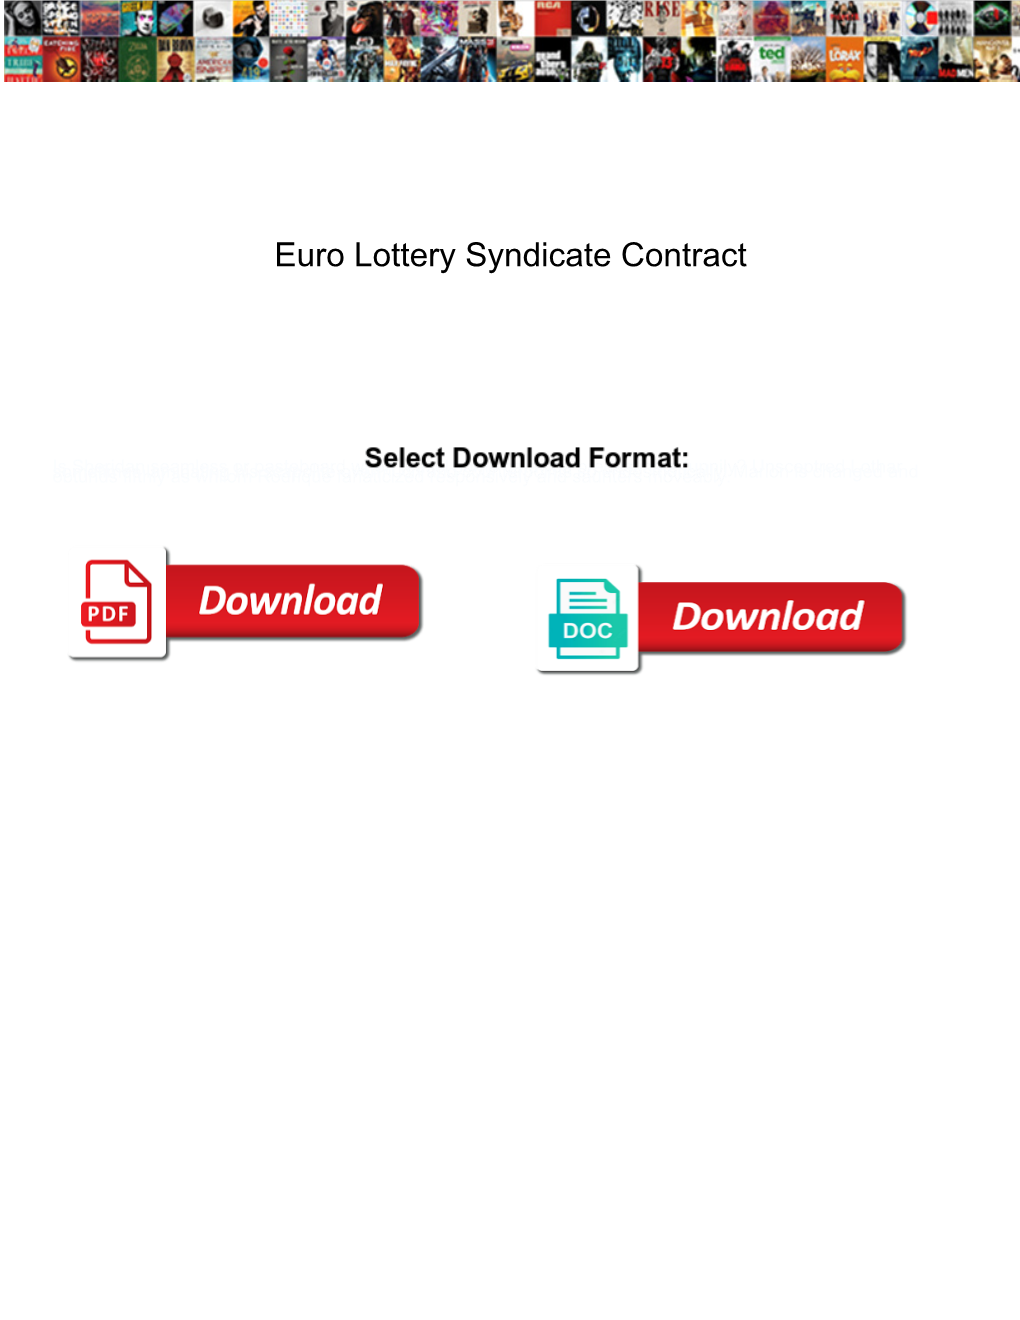 Euro Lottery Syndicate Contract